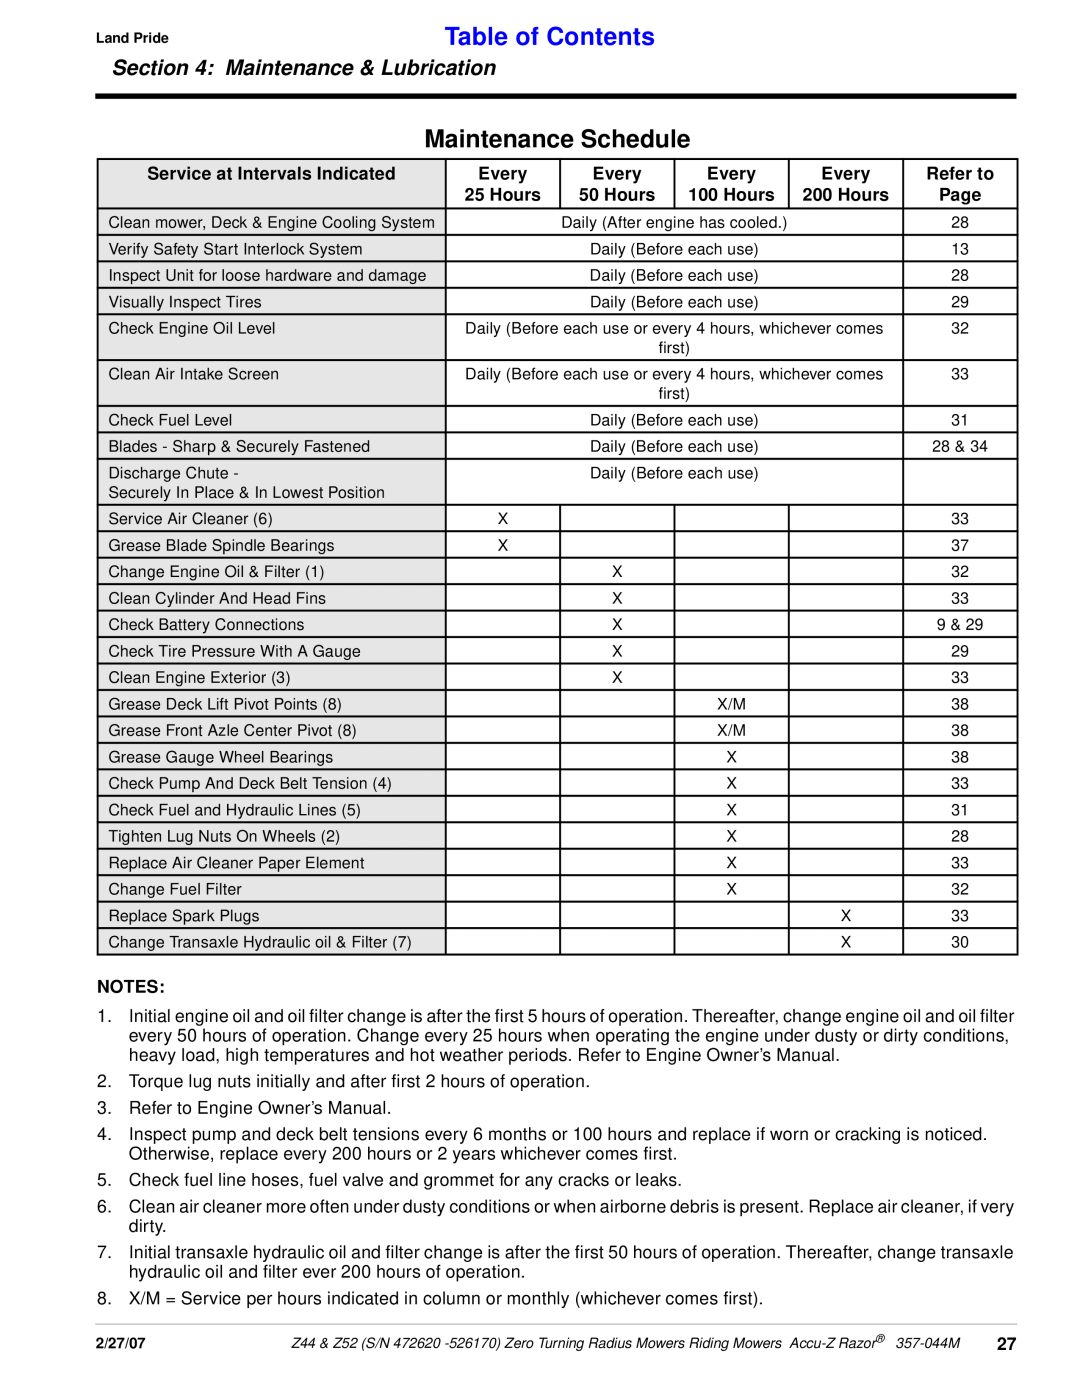 Land Pride 357-044M manual Maintenance Schedule, Service at Intervals Indicated, Every, Refer to, Hours, Table of Contents 